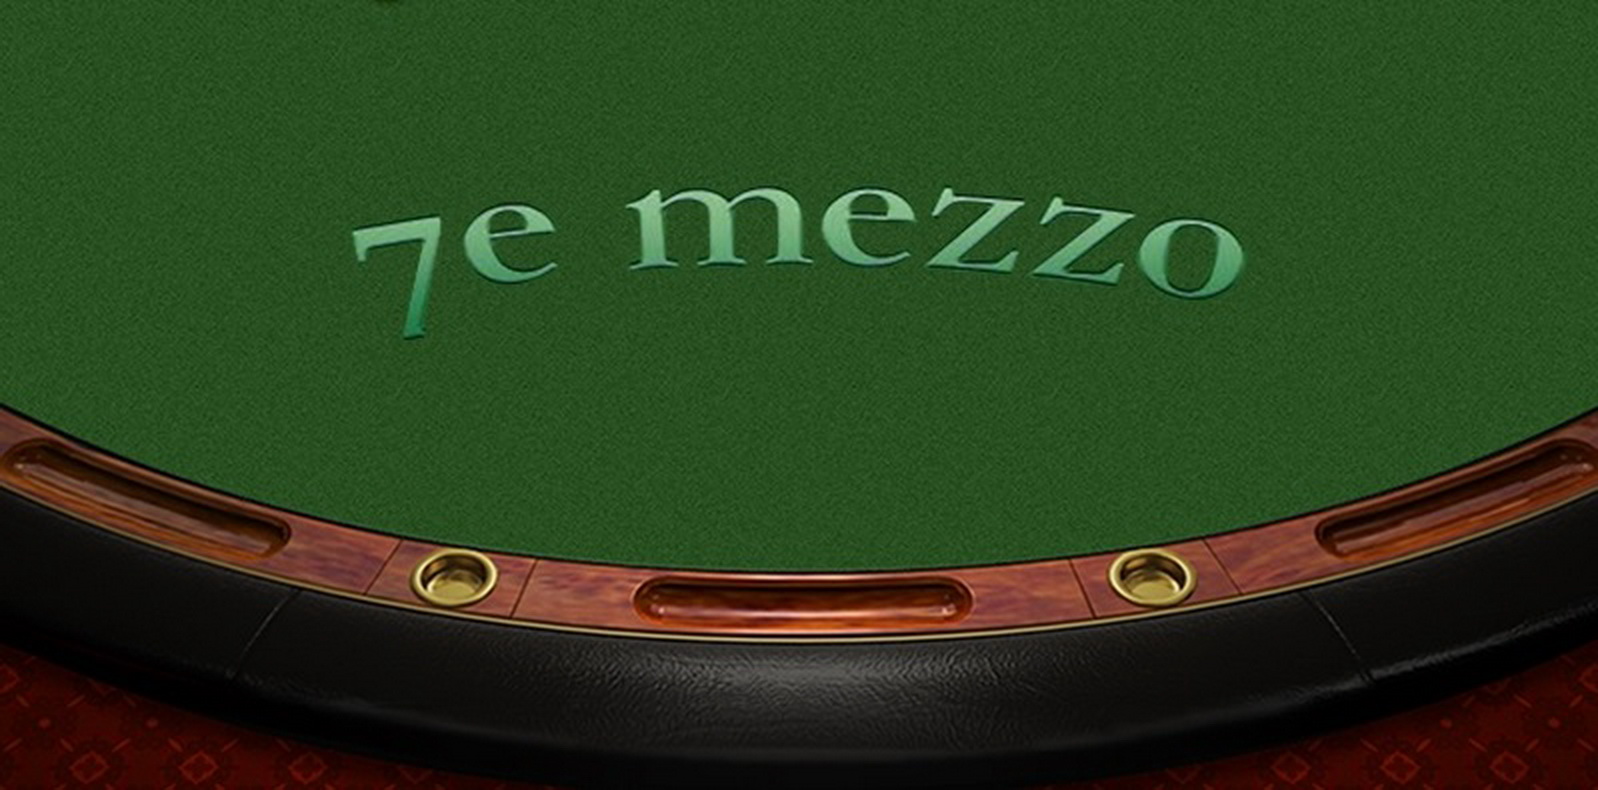 The 7 e Mezzo Online Slot Demo Game by Playtech